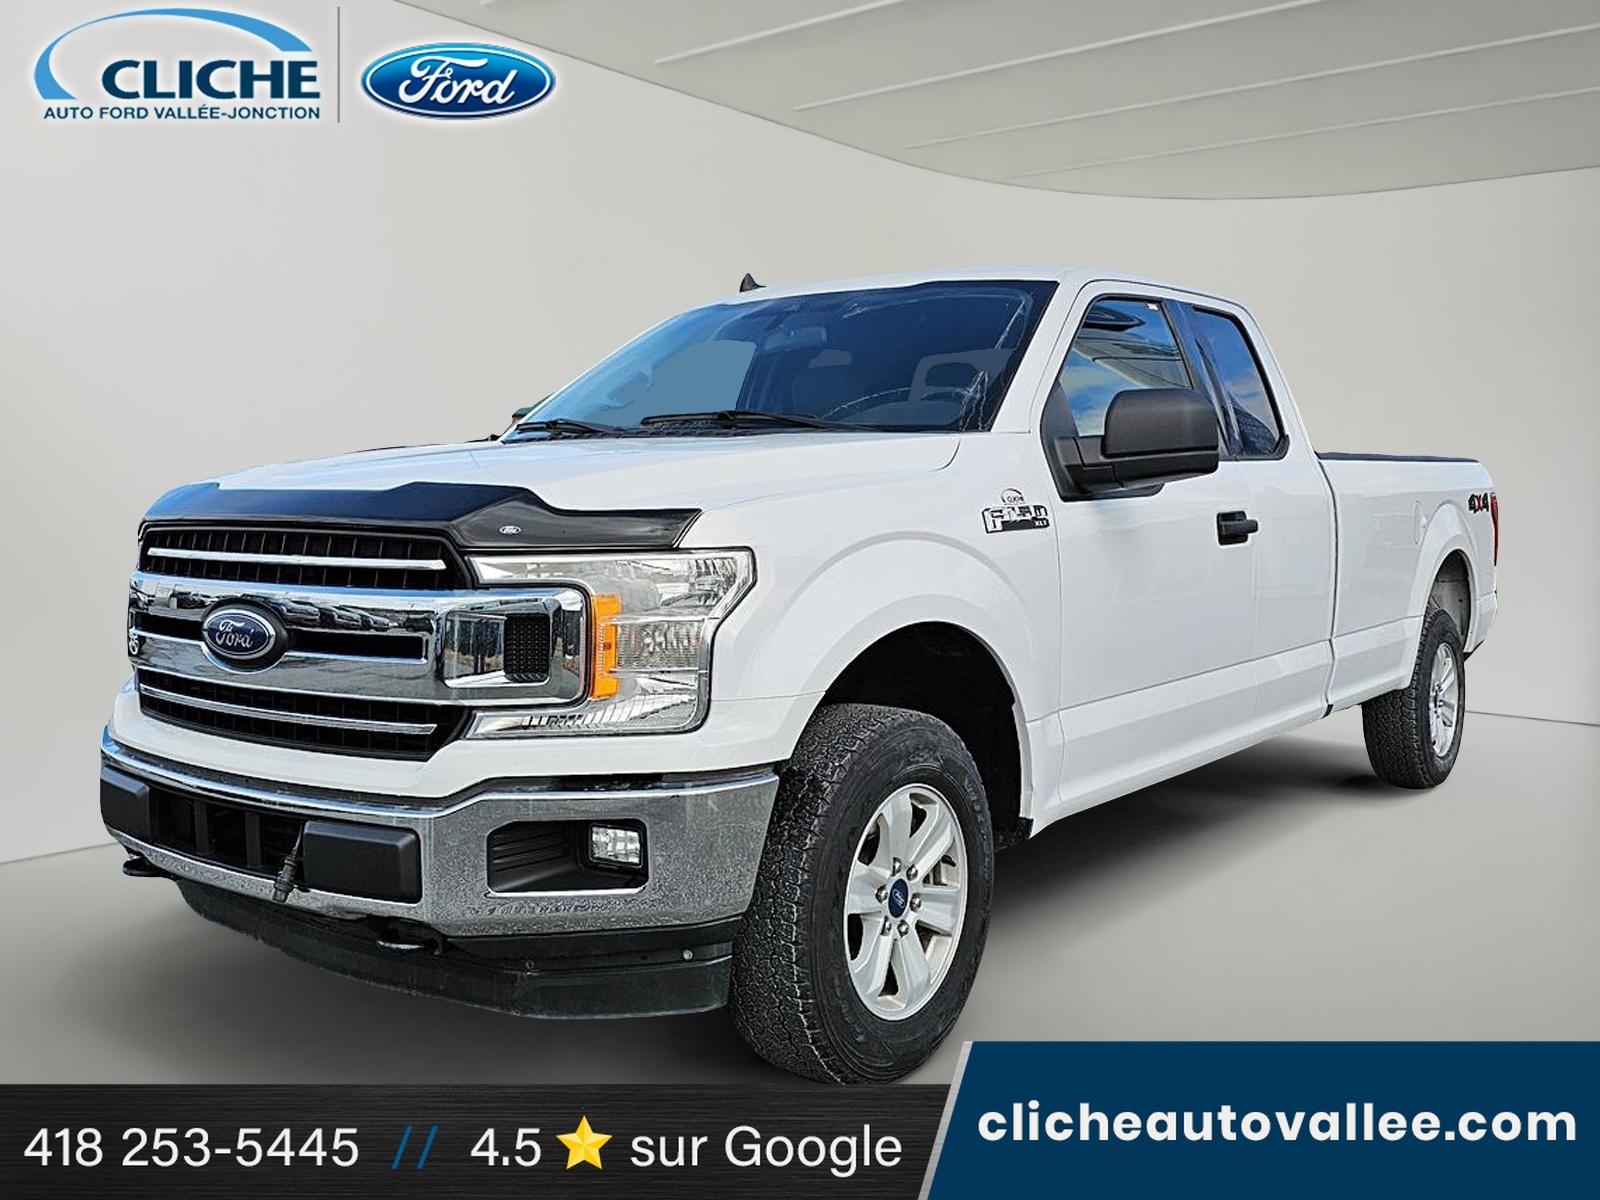 2020 Ford F-150 XLT, BTE 8 PIEDS, 4X4, ECOBOOST 3.5L